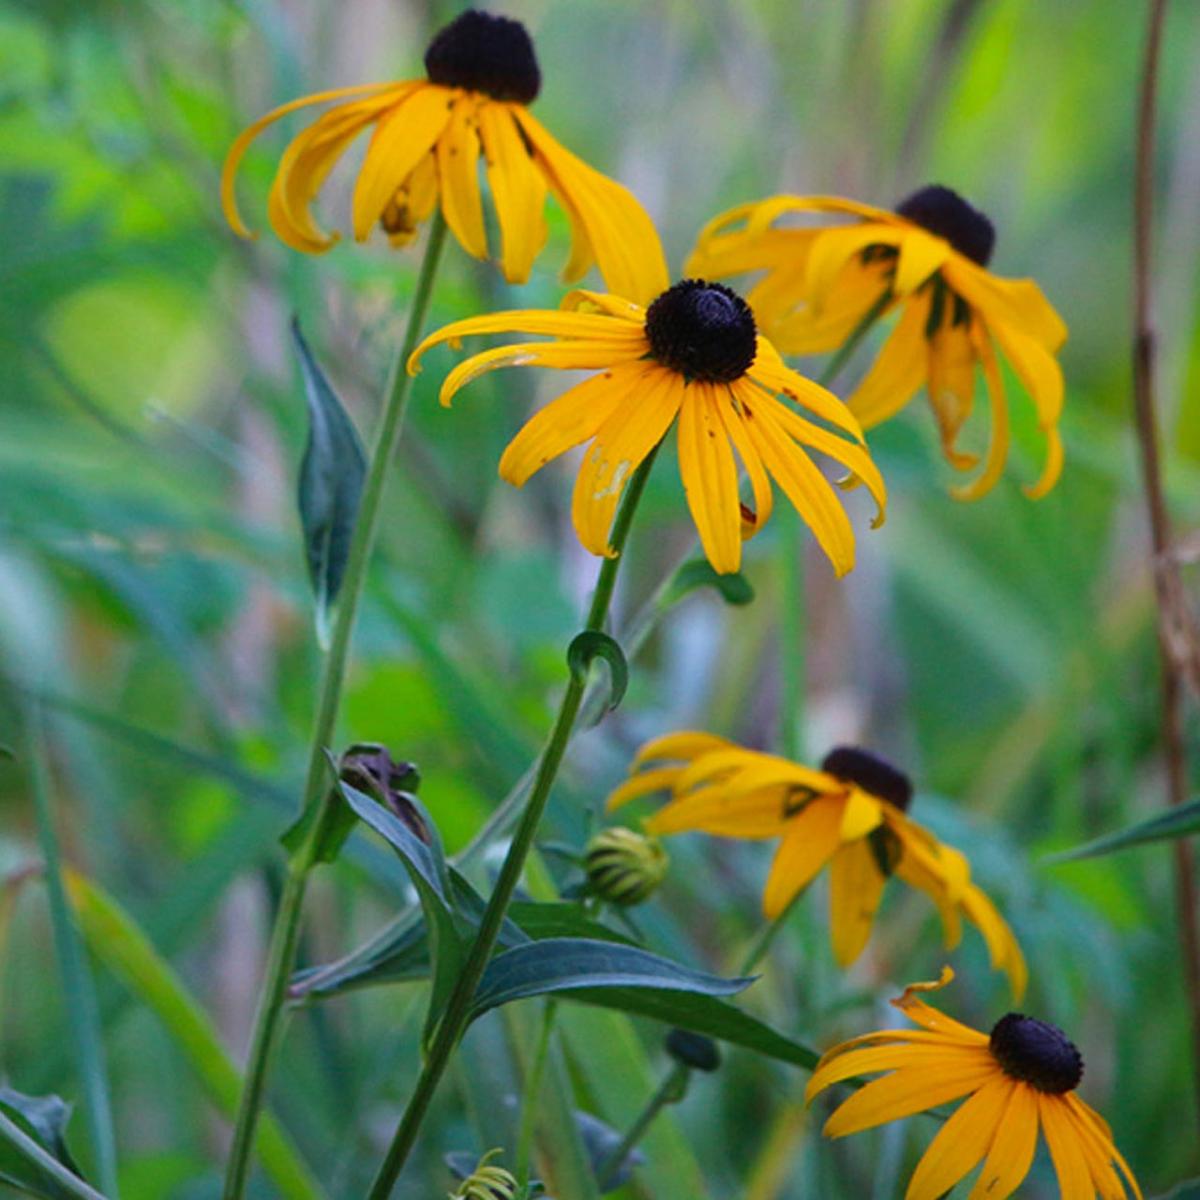 Picture of black-eyed susans. Flowers with yellow petals and dark brown raised disk in center.